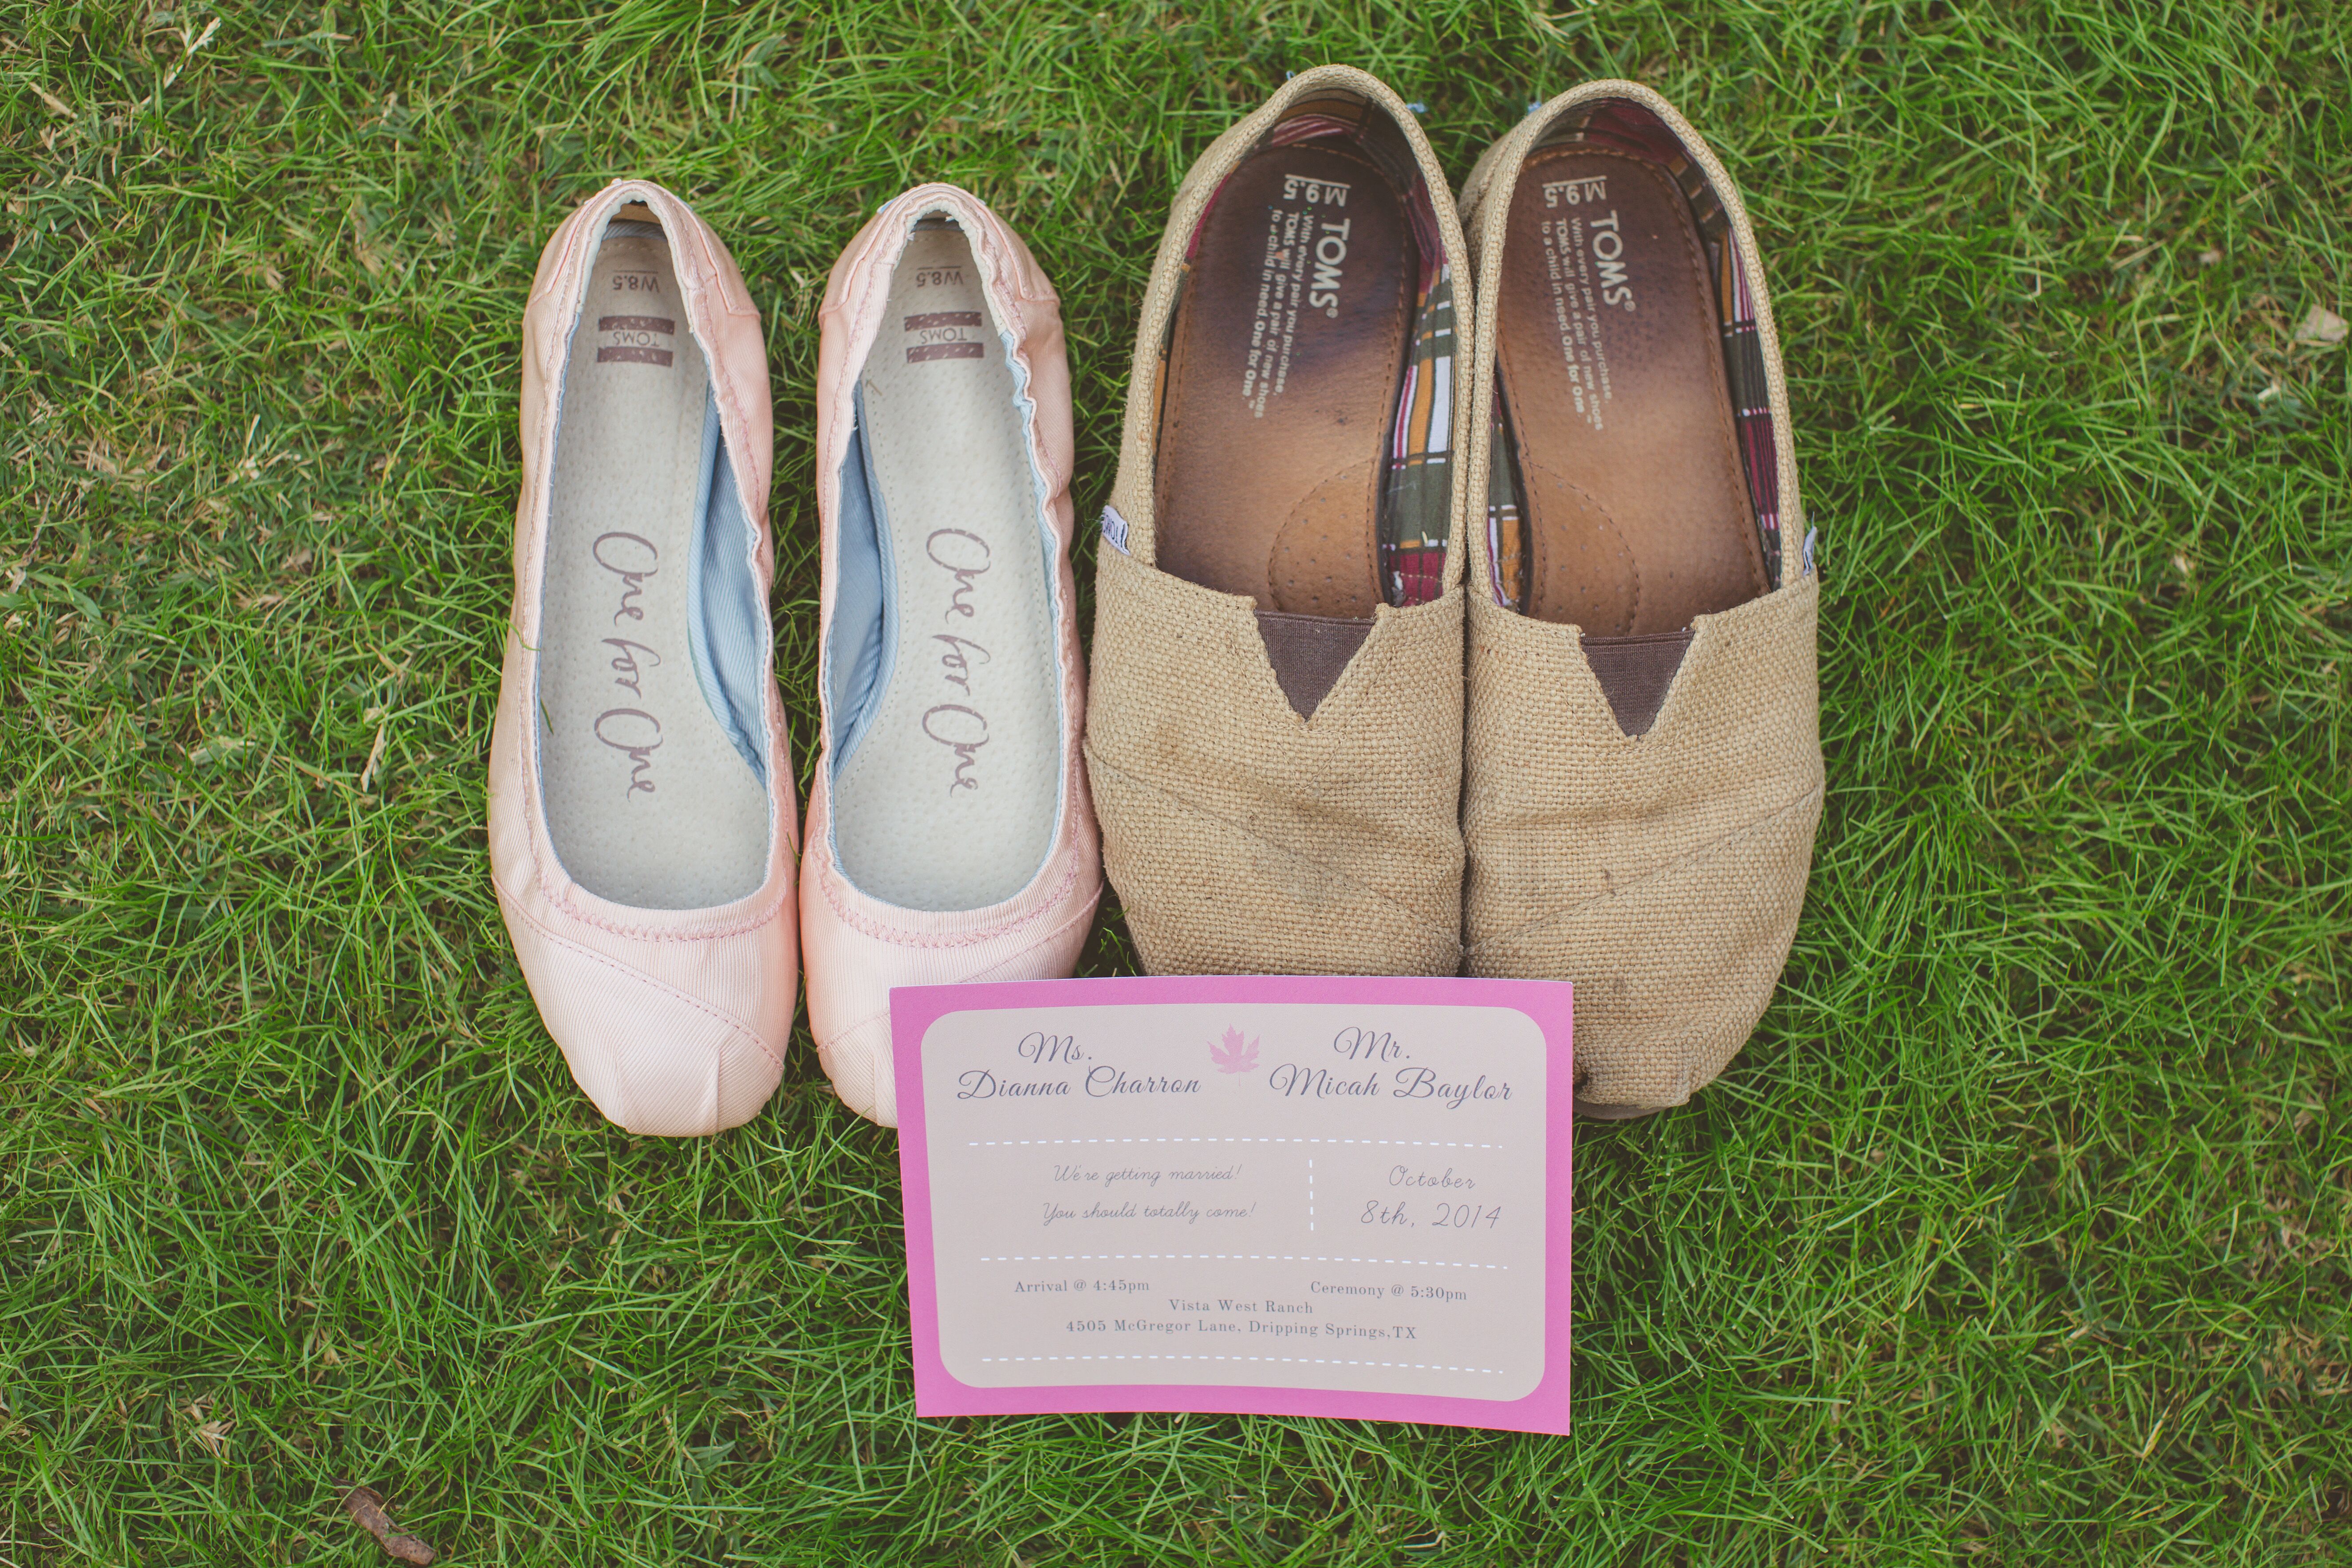 His and Hers TOMS Wedding Shoes